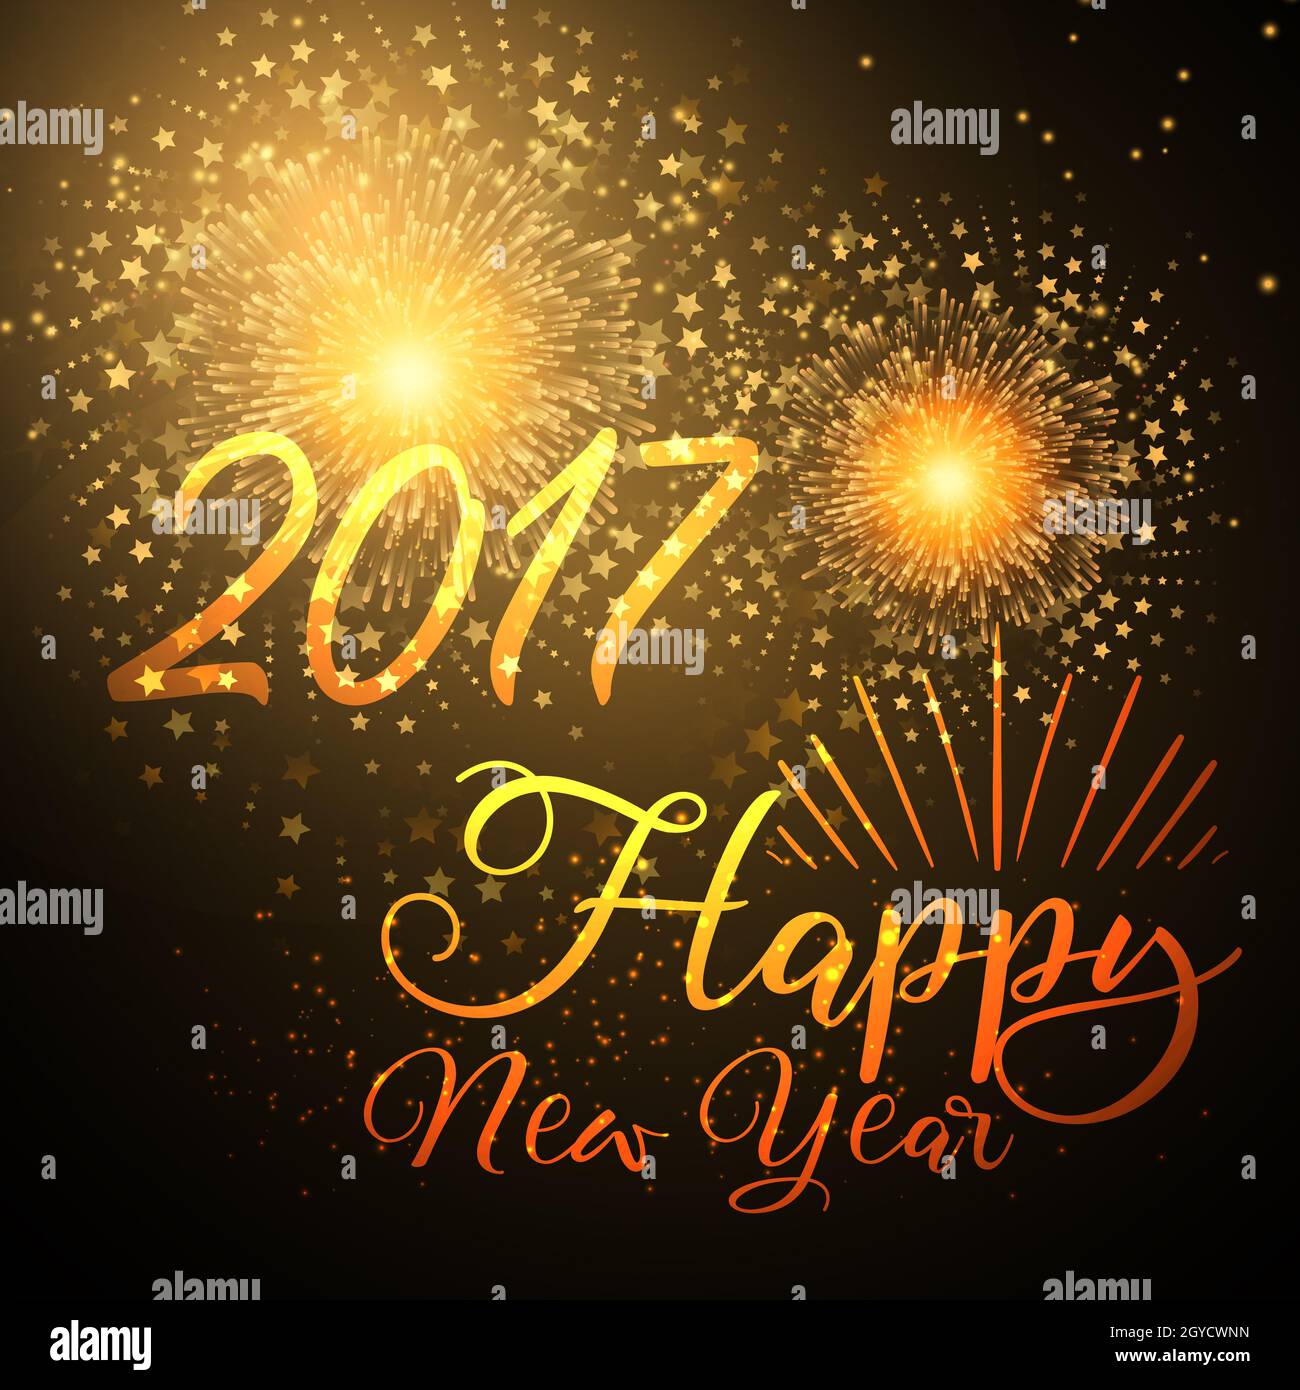 Happy New Year background with fireworks design Stock Photo